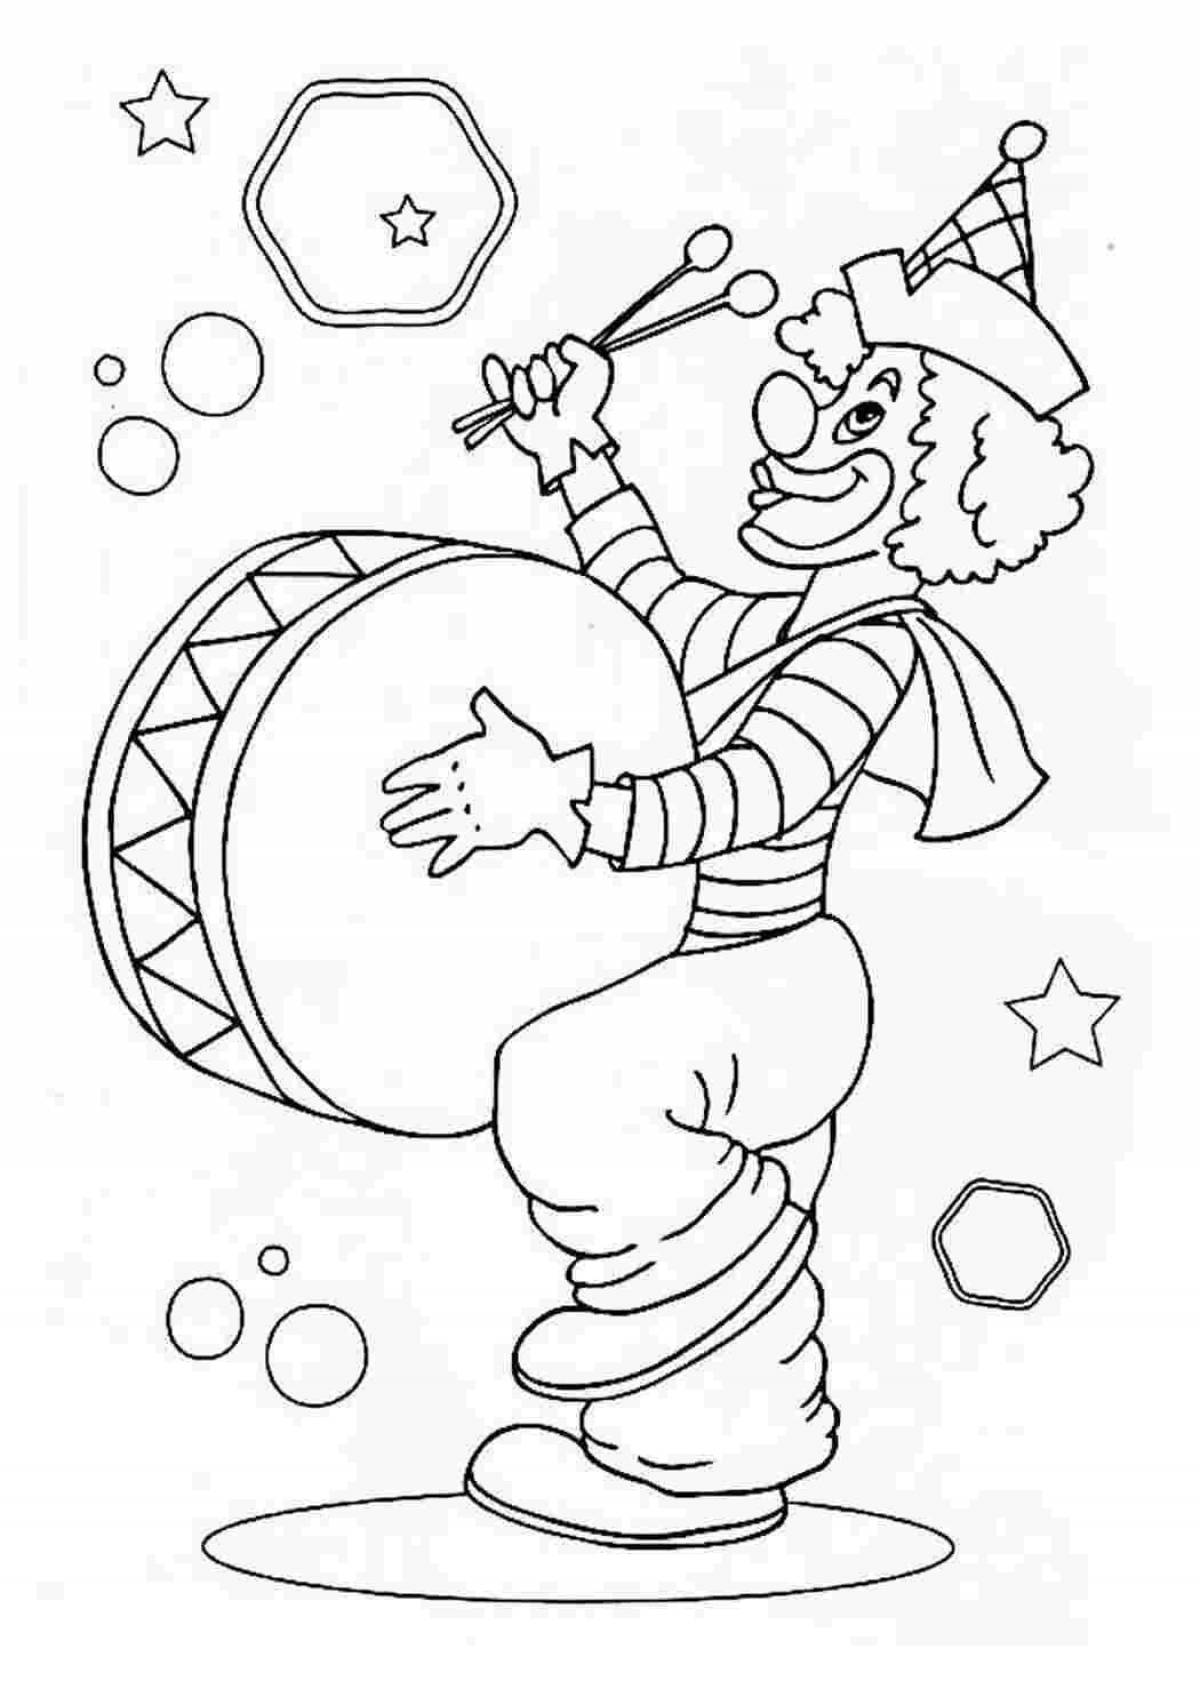 Merry circus coloring for children 5-6 years old